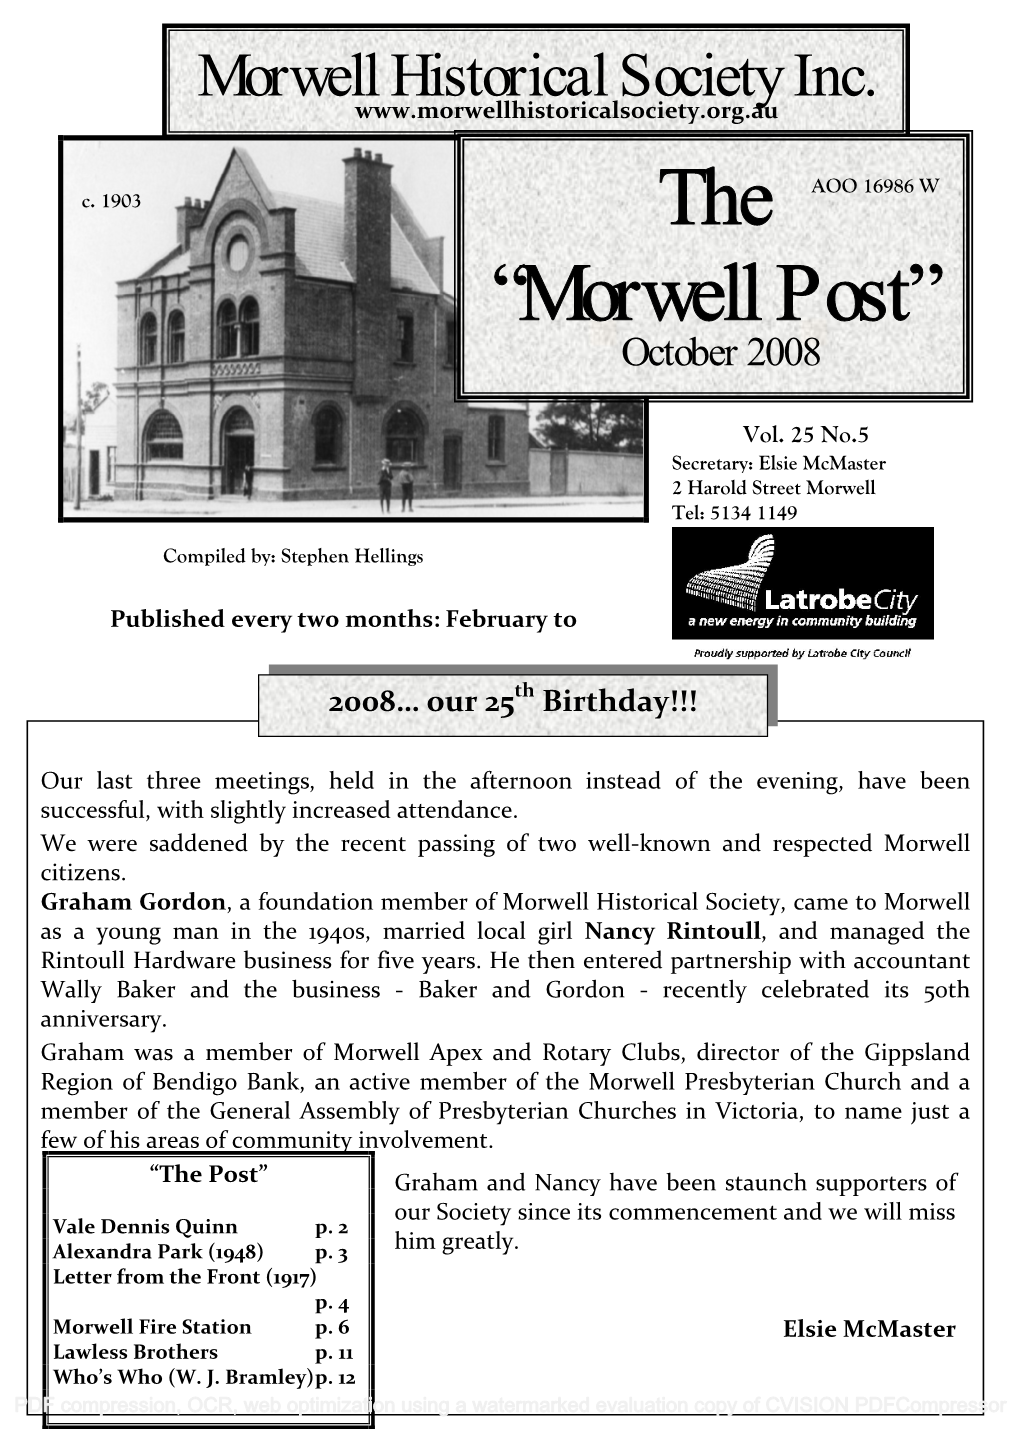 The “Morwell Post”